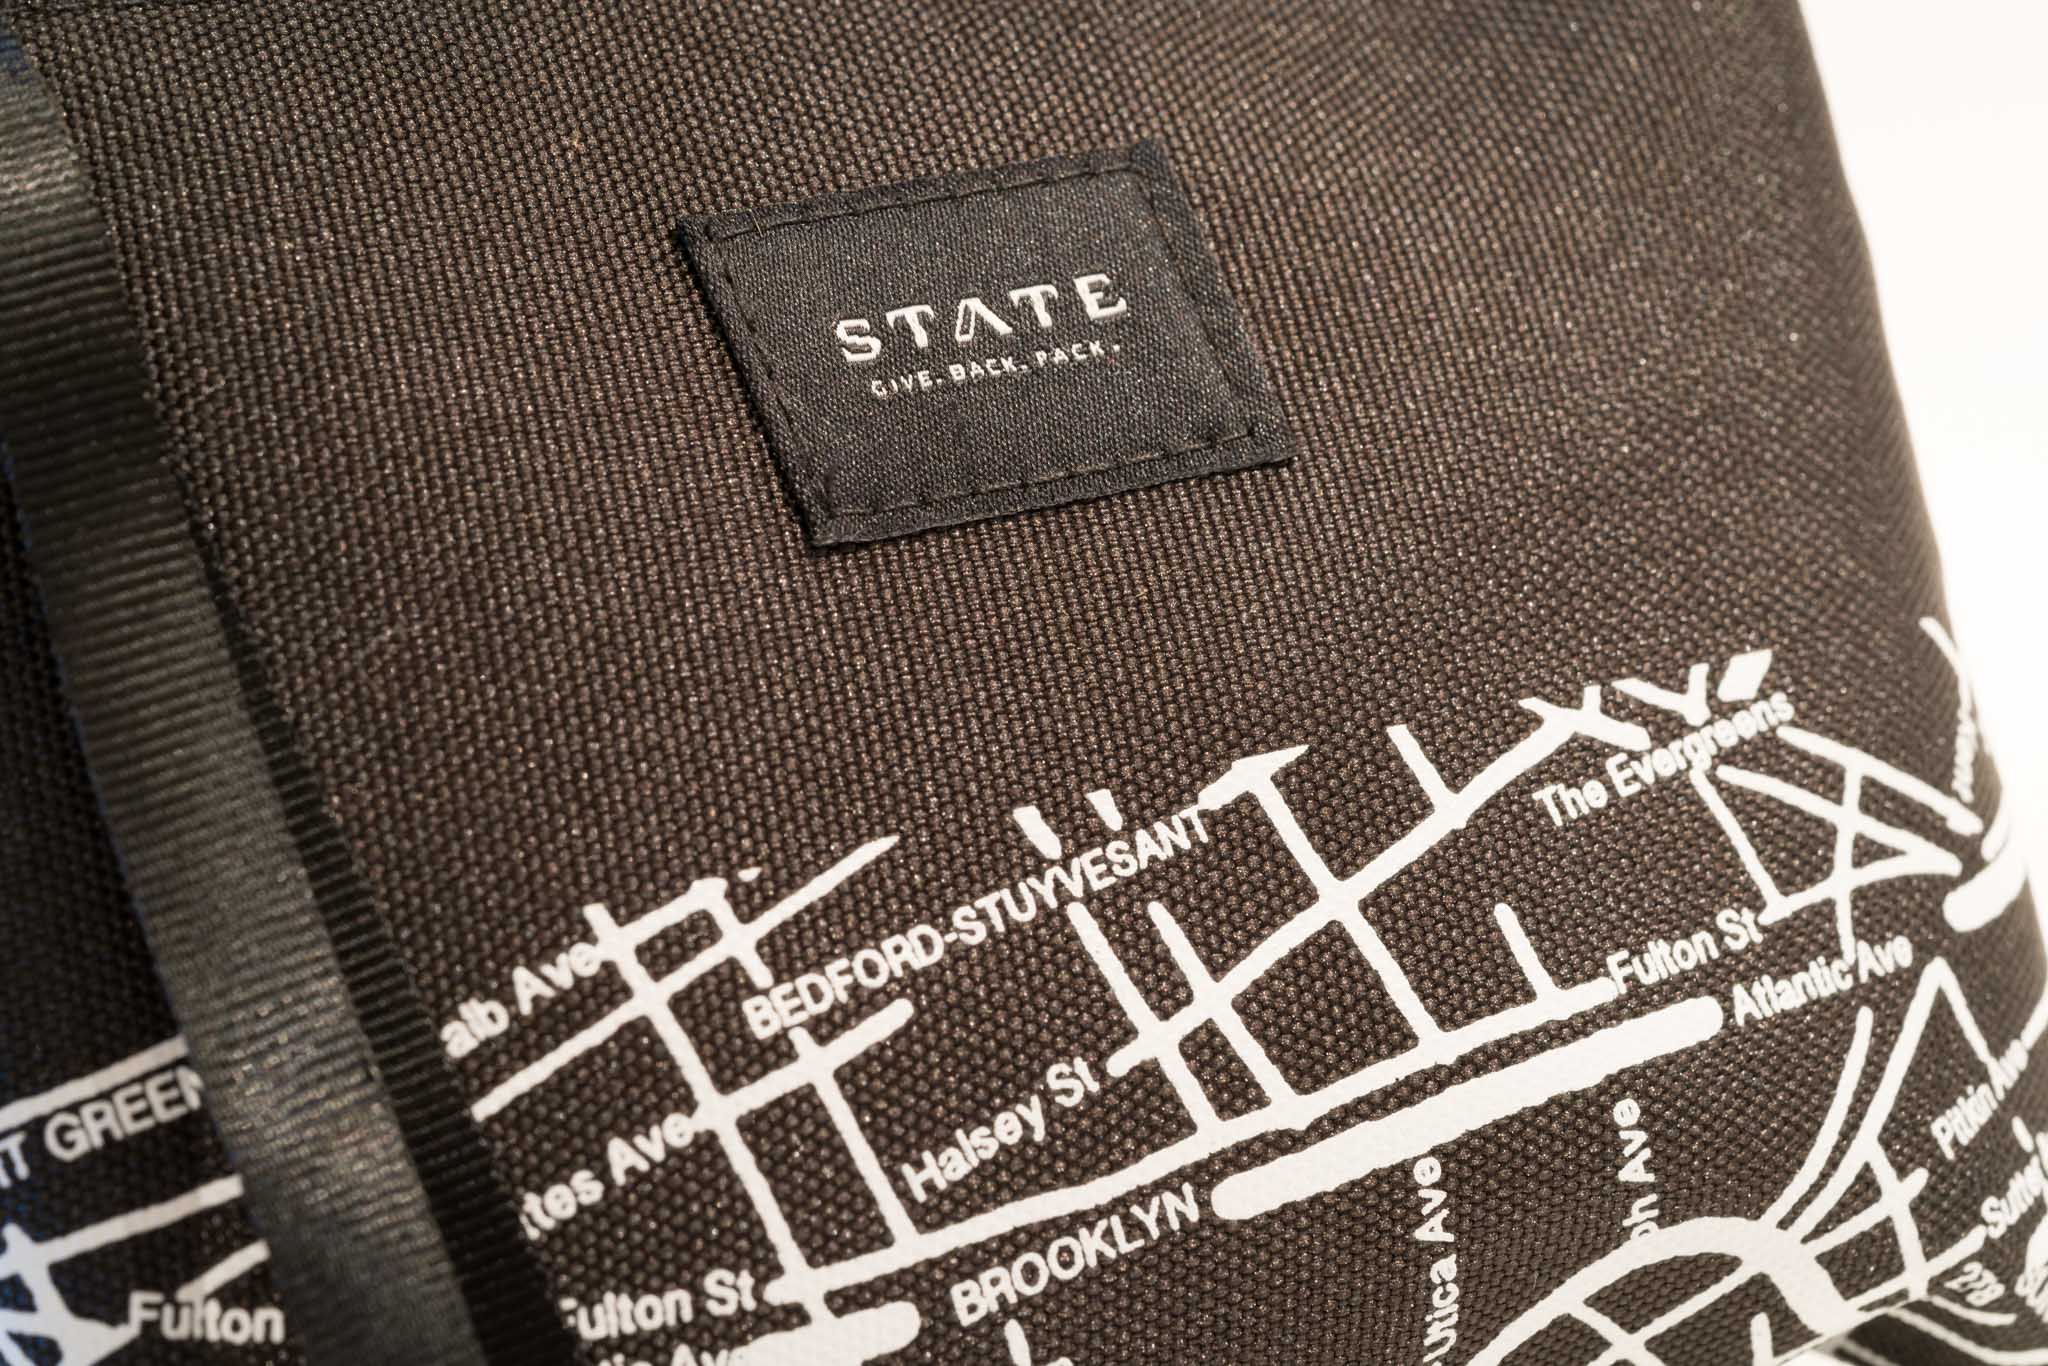 a black and white label on a brown fabric